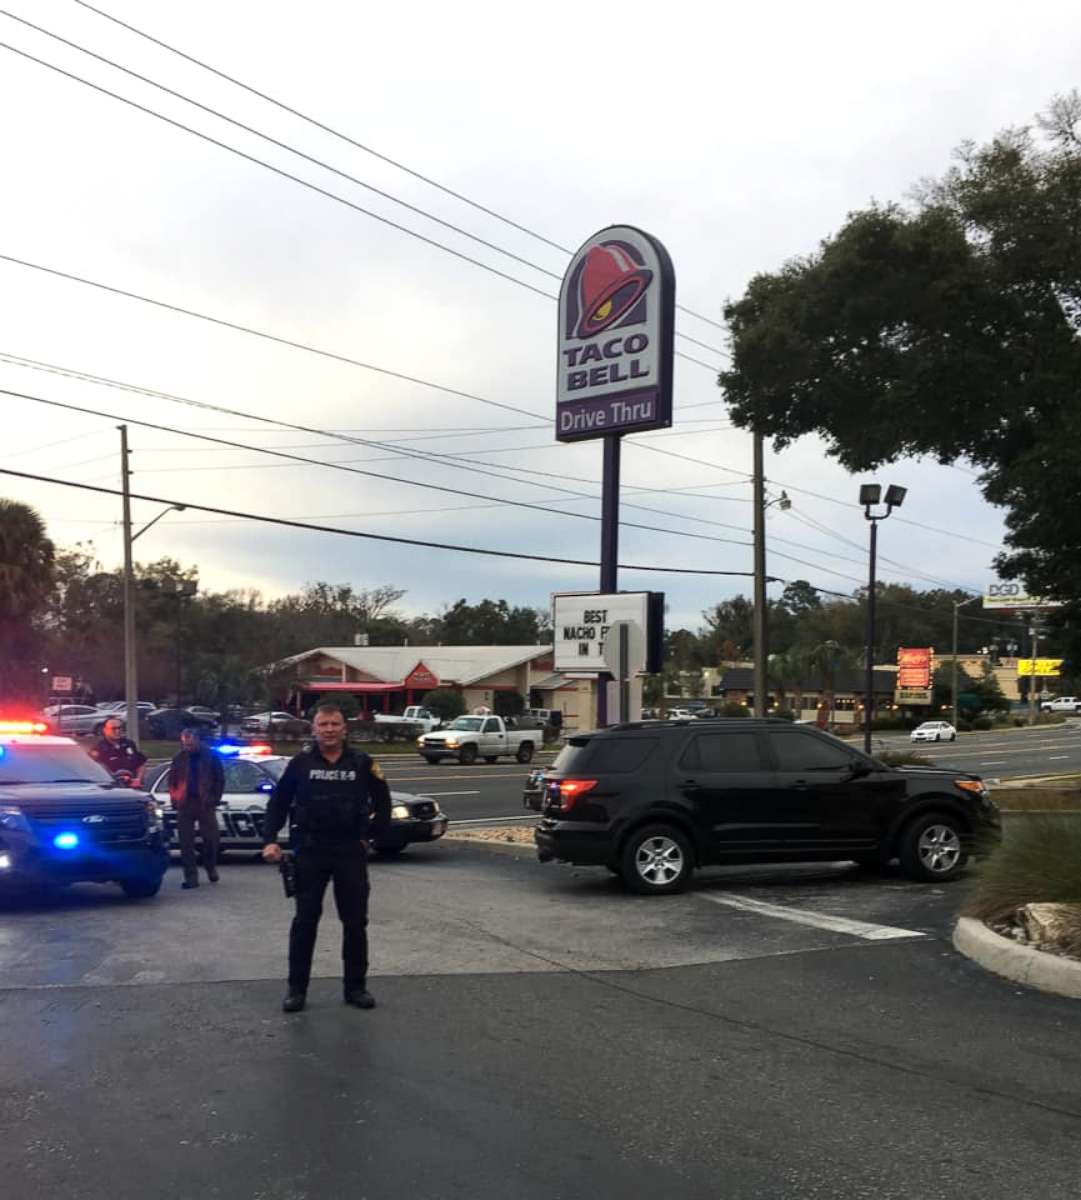 PHOTO: The Ocala Police Department removed an authentic WWII hand grenade from a Taco Bell in Ocala, Fla., Jan. 26, 2019.  